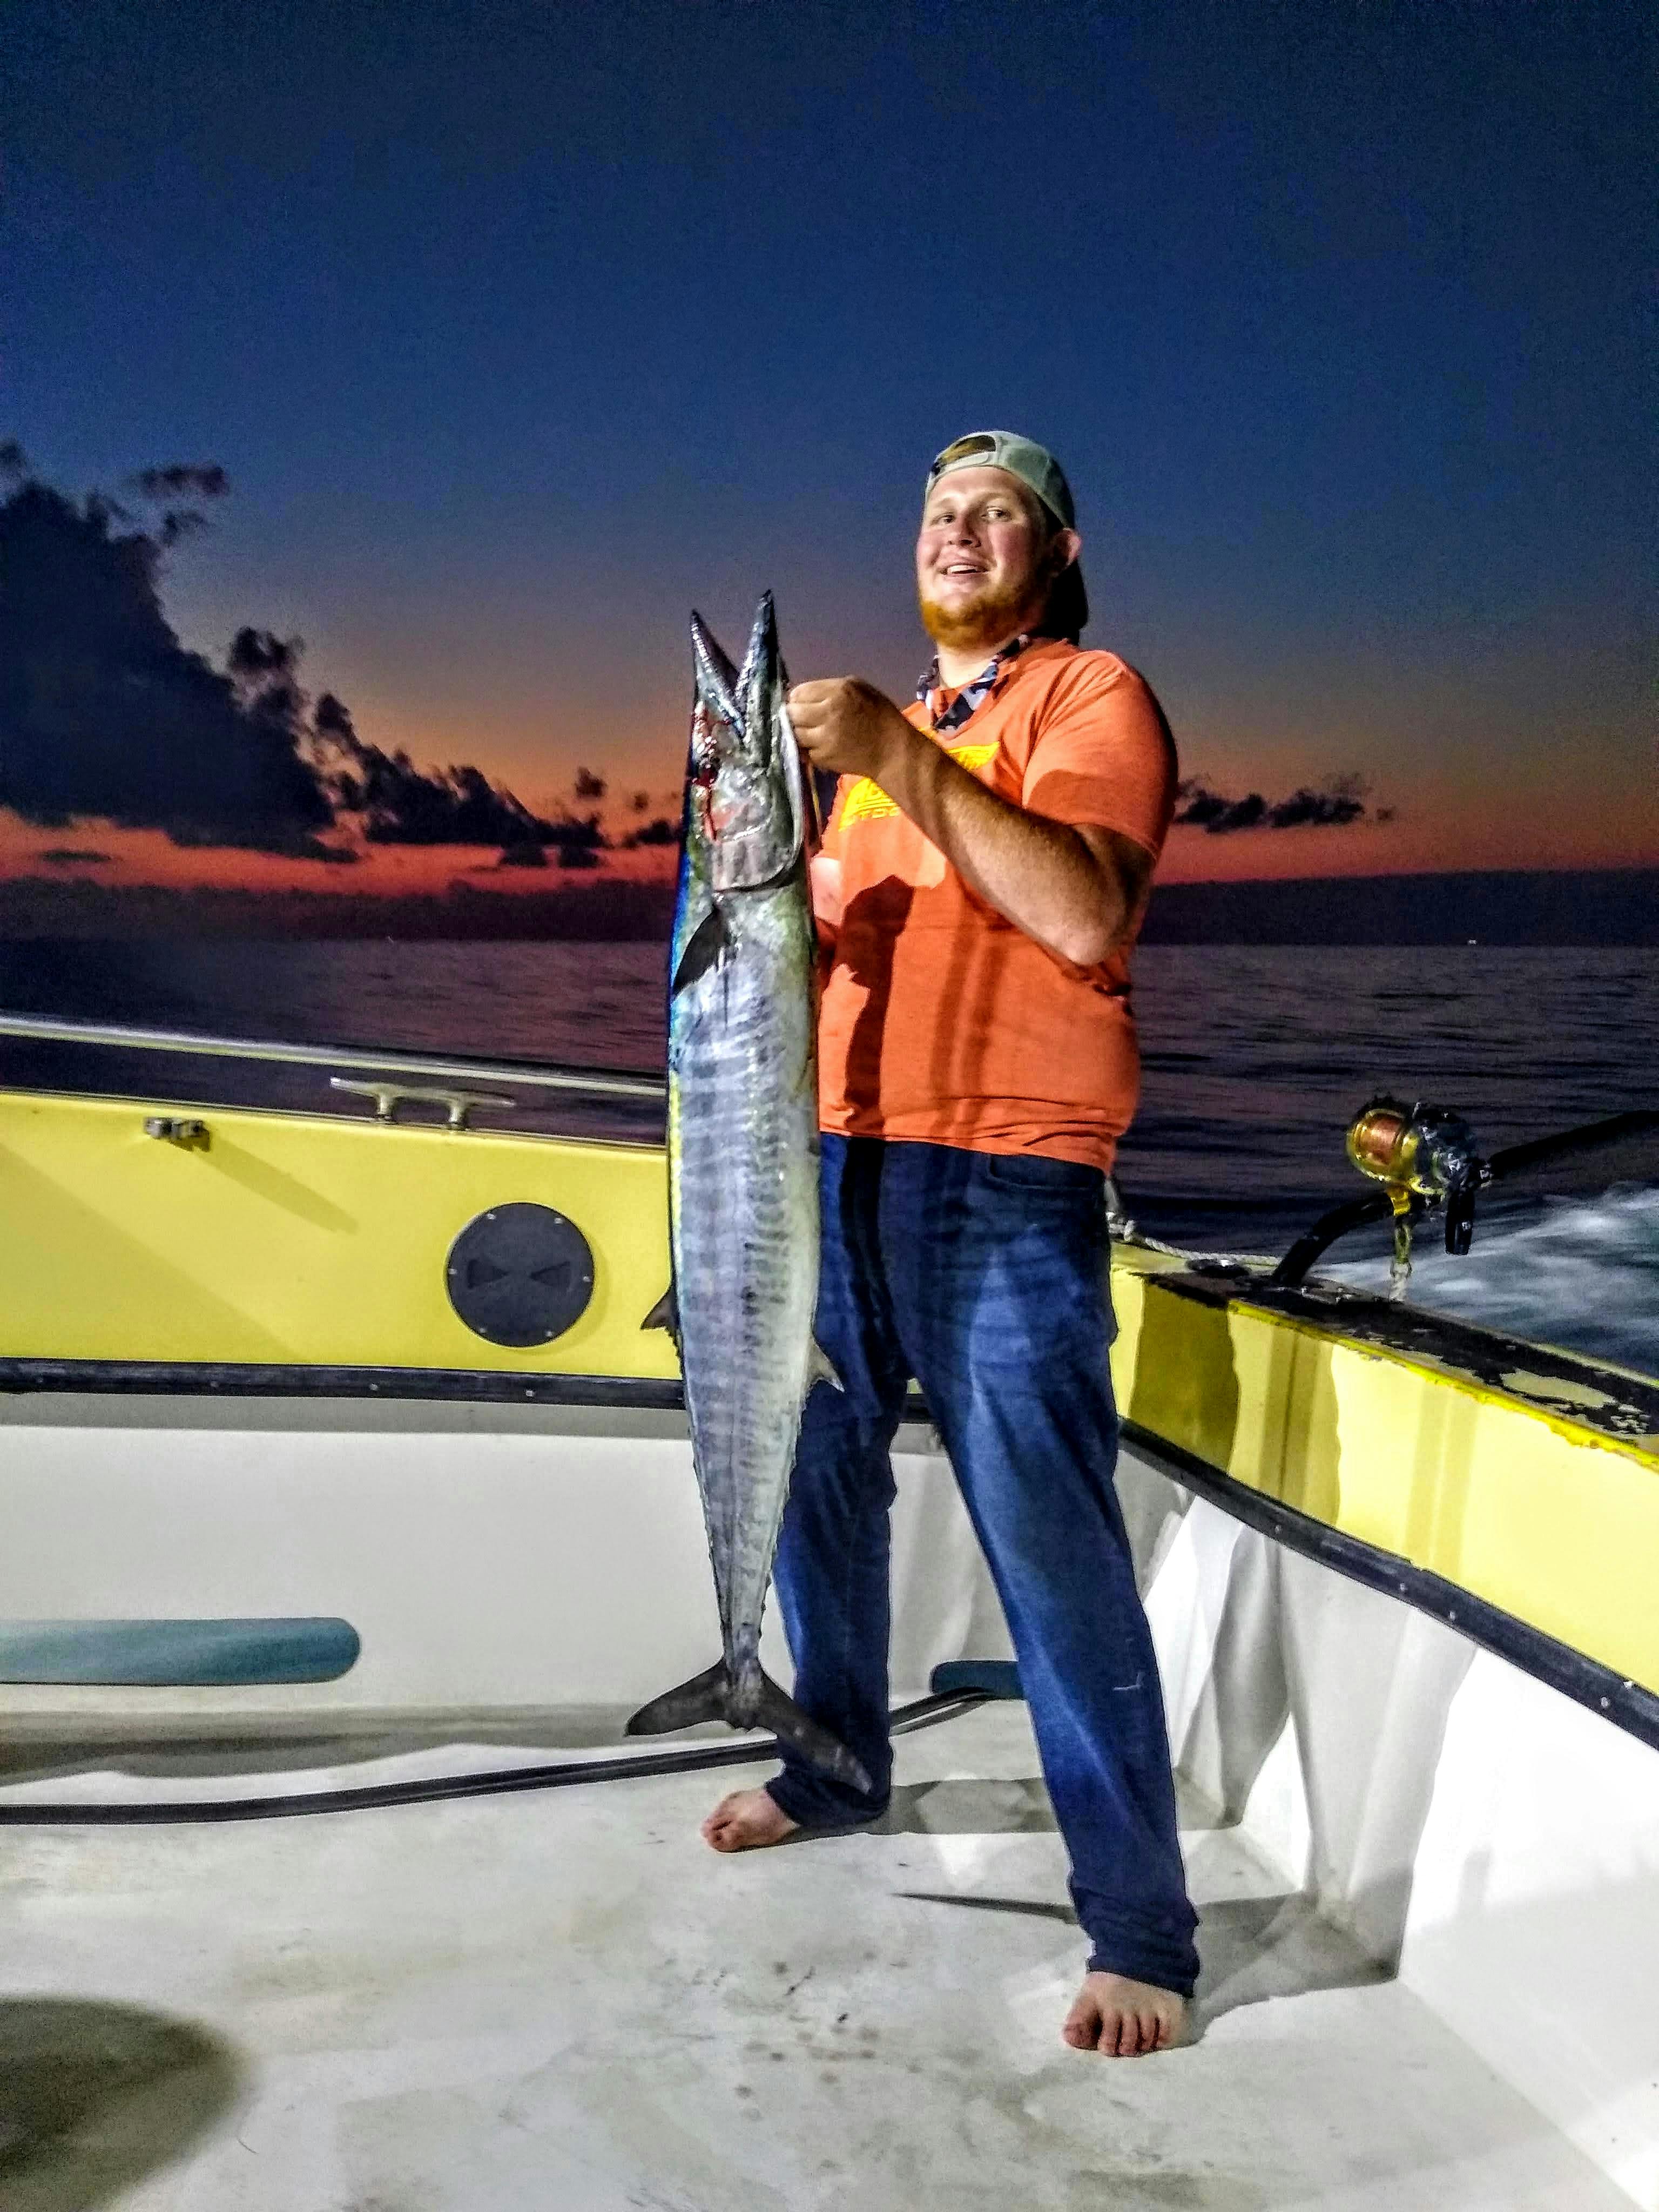 The author stands with bare feet on a boat on the open water. He holds a massive fish and smiles with it. The image is taken at twilight. 